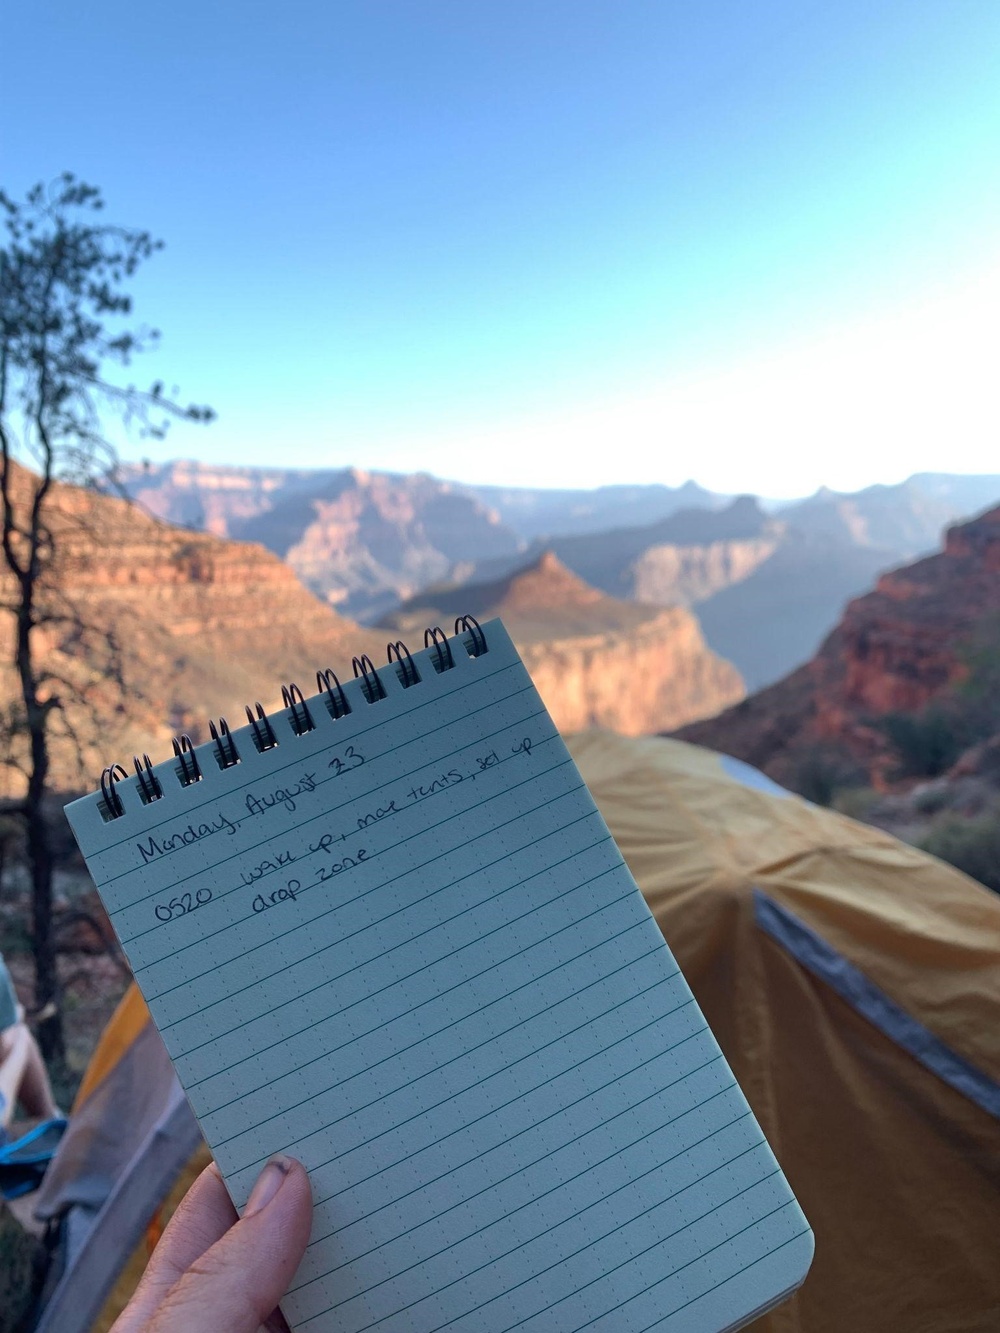 Stranded in the Grand Canyon, my OCS training saved my life